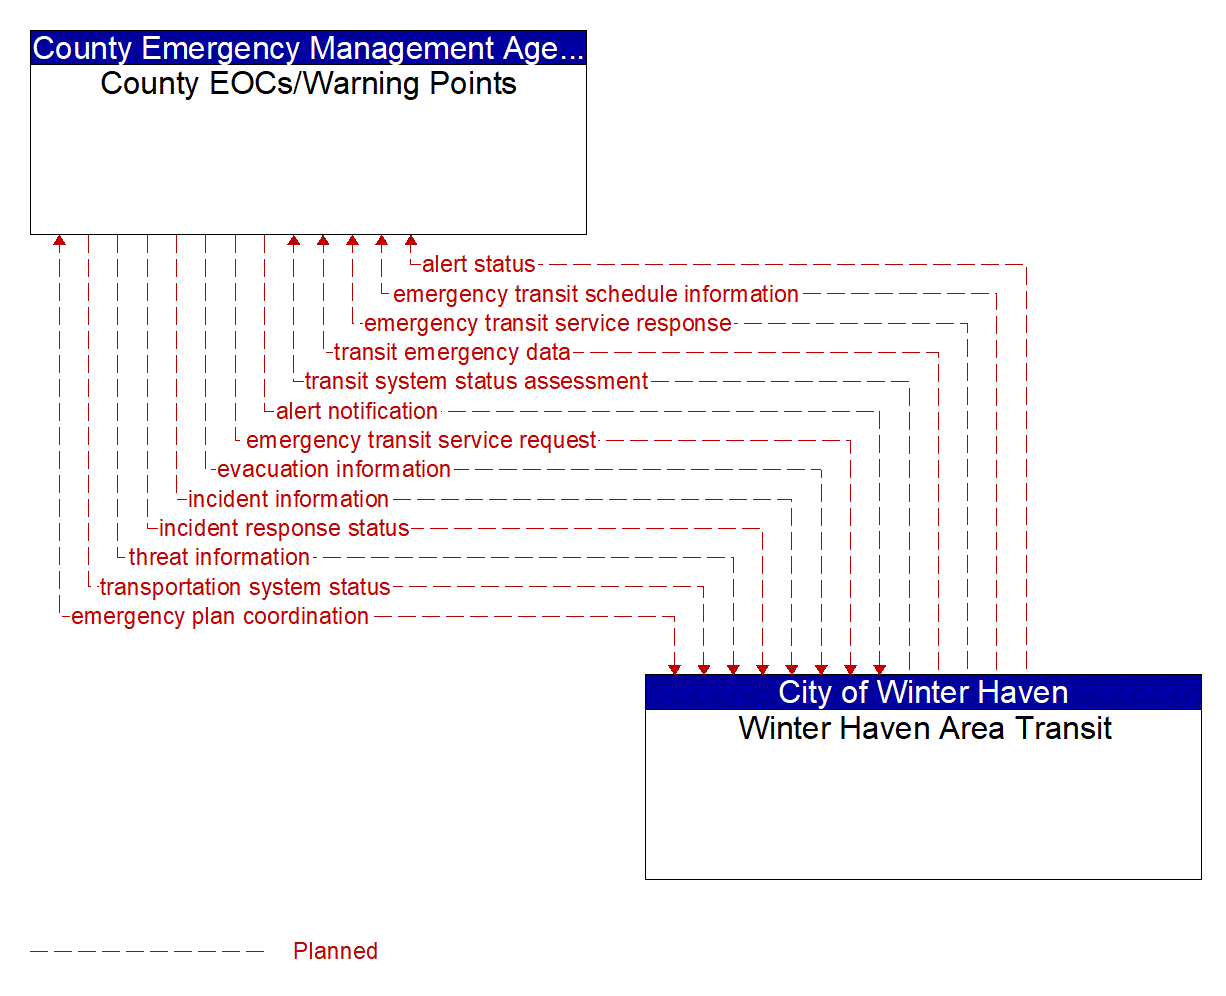 Architecture Flow Diagram: Winter Haven Area Transit <--> County EOCs/Warning Points